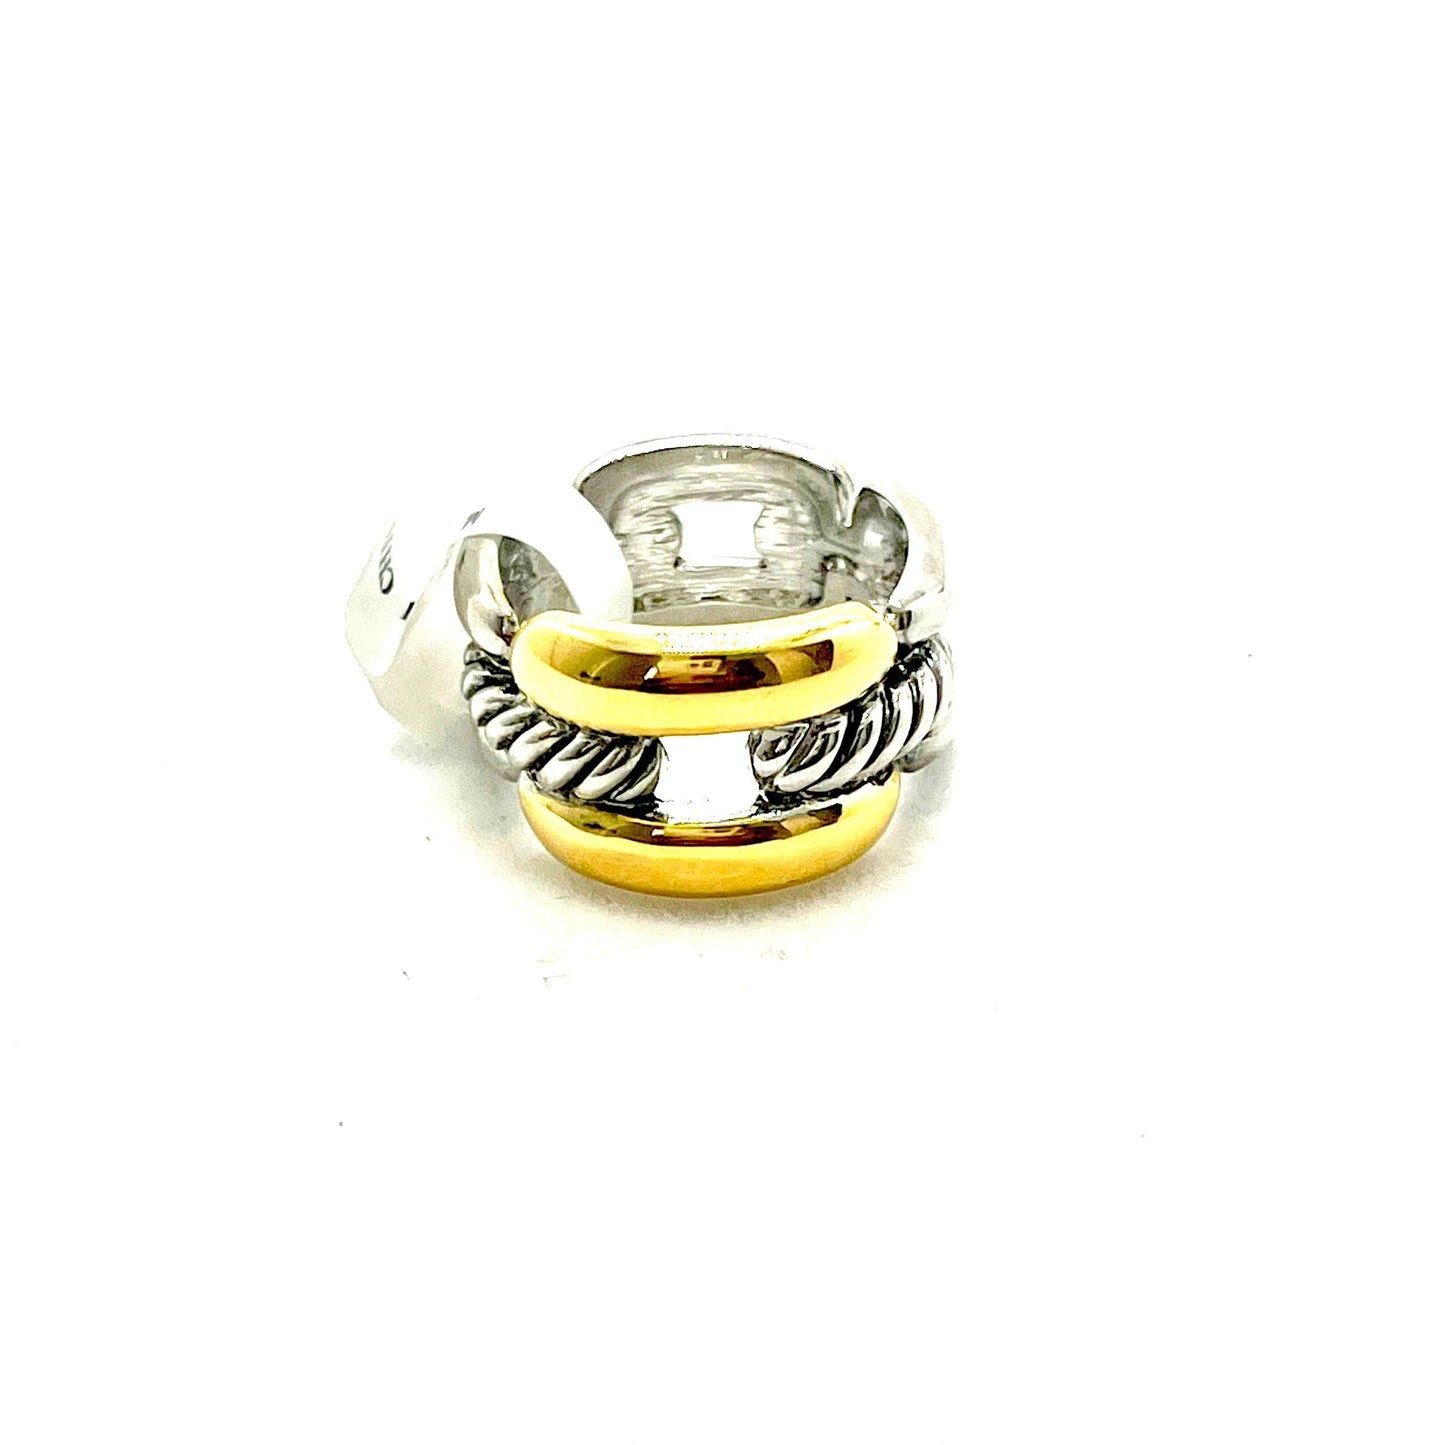 Cable Link Design Inspired Rings